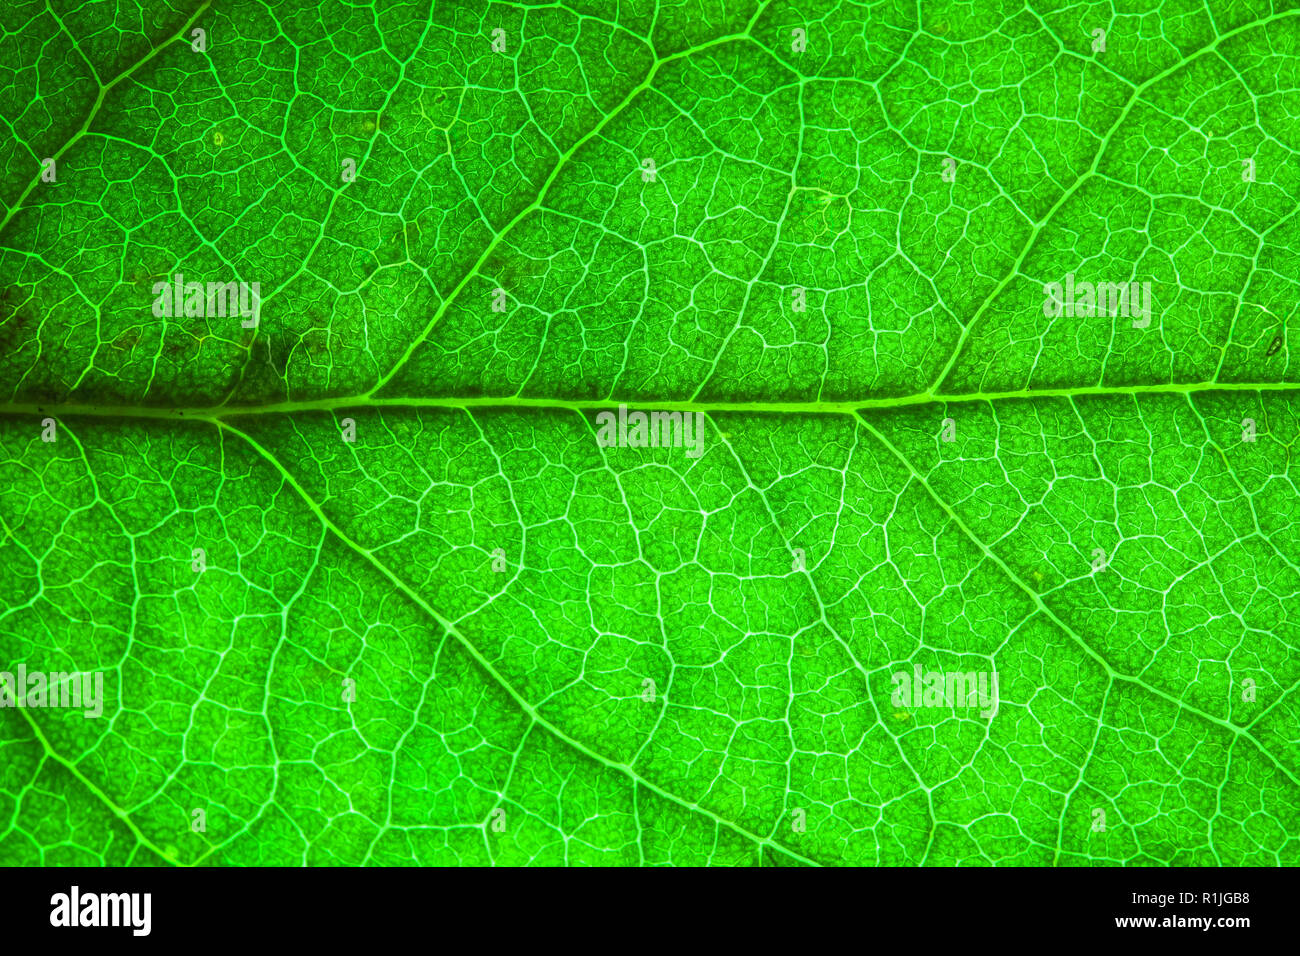 Natural leaf fresh detailed rugged surface structure extreme macro photo with midrib and visible leaf veins grooves as a nature text Stock Photo - Alamy